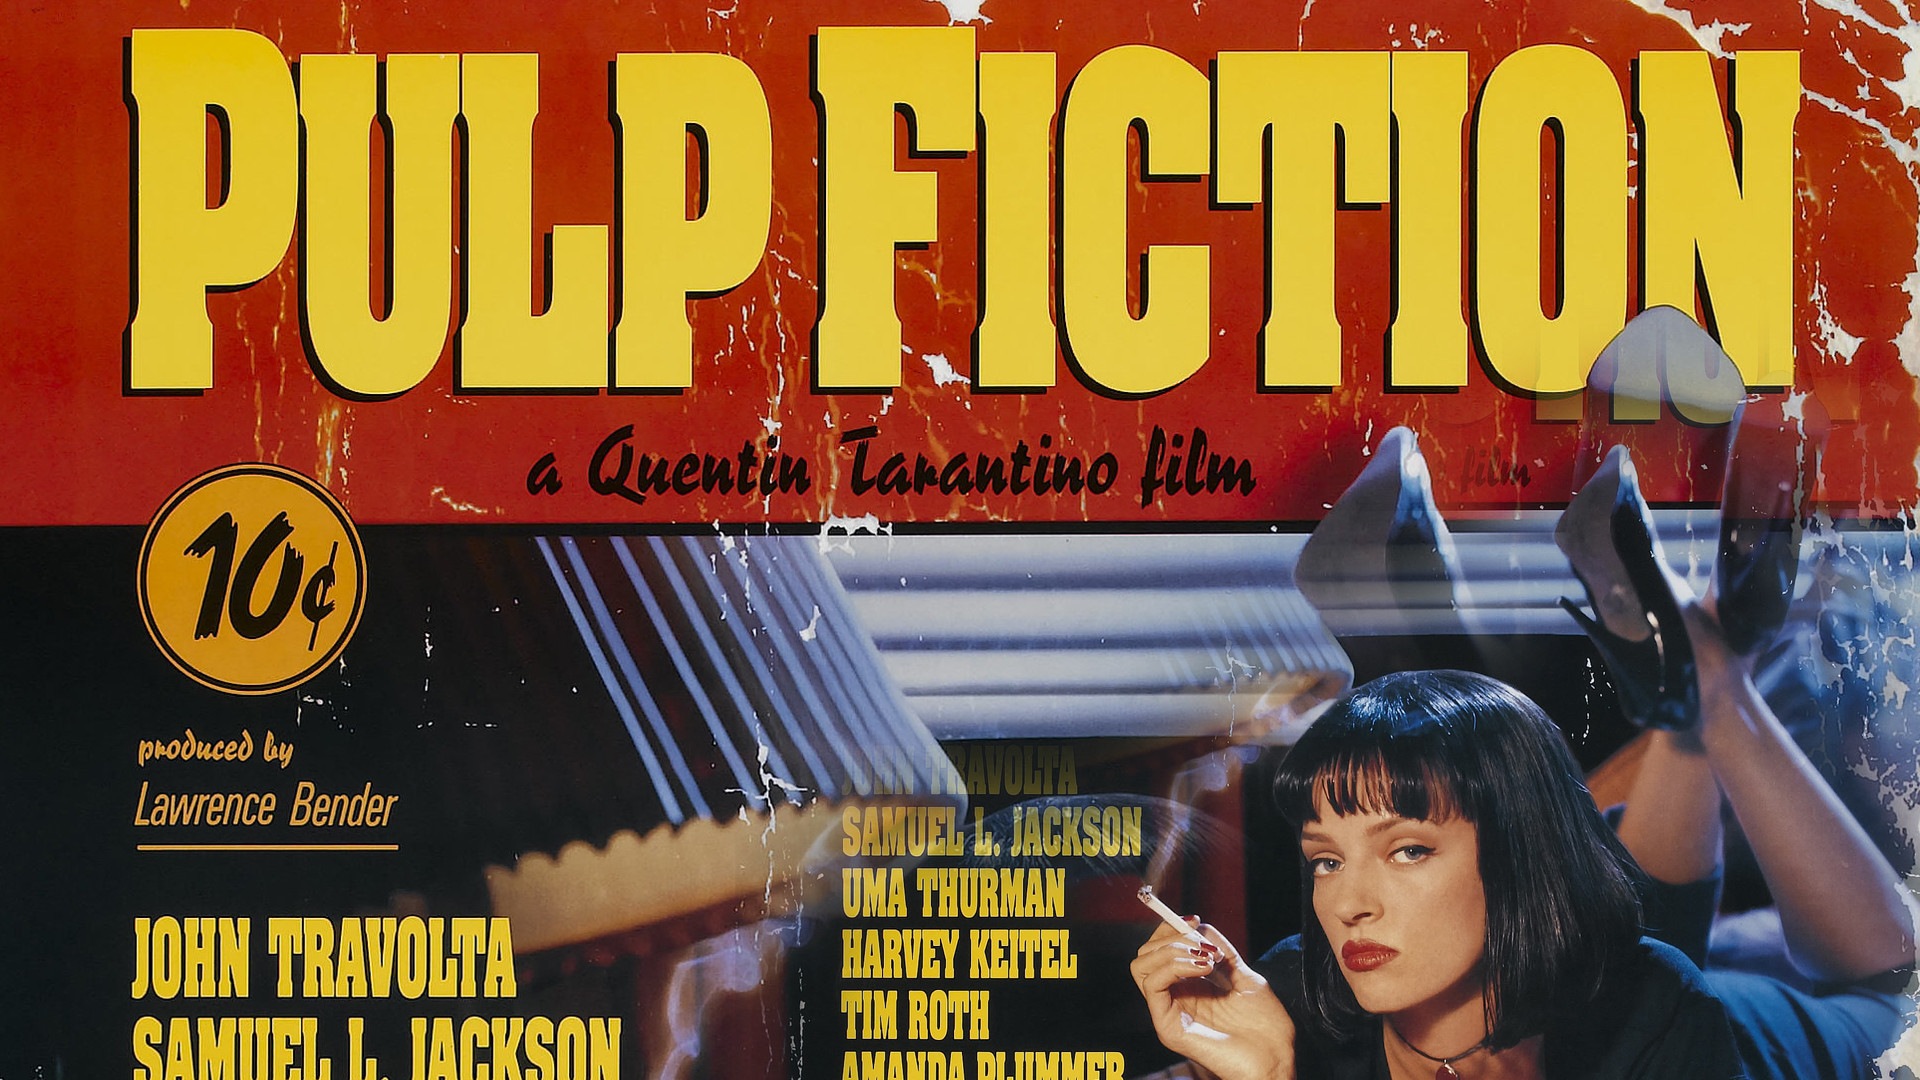 1920x1080 Pulp Fiction Xbox 360 Dashboard Wallpaper by Udder-Juice